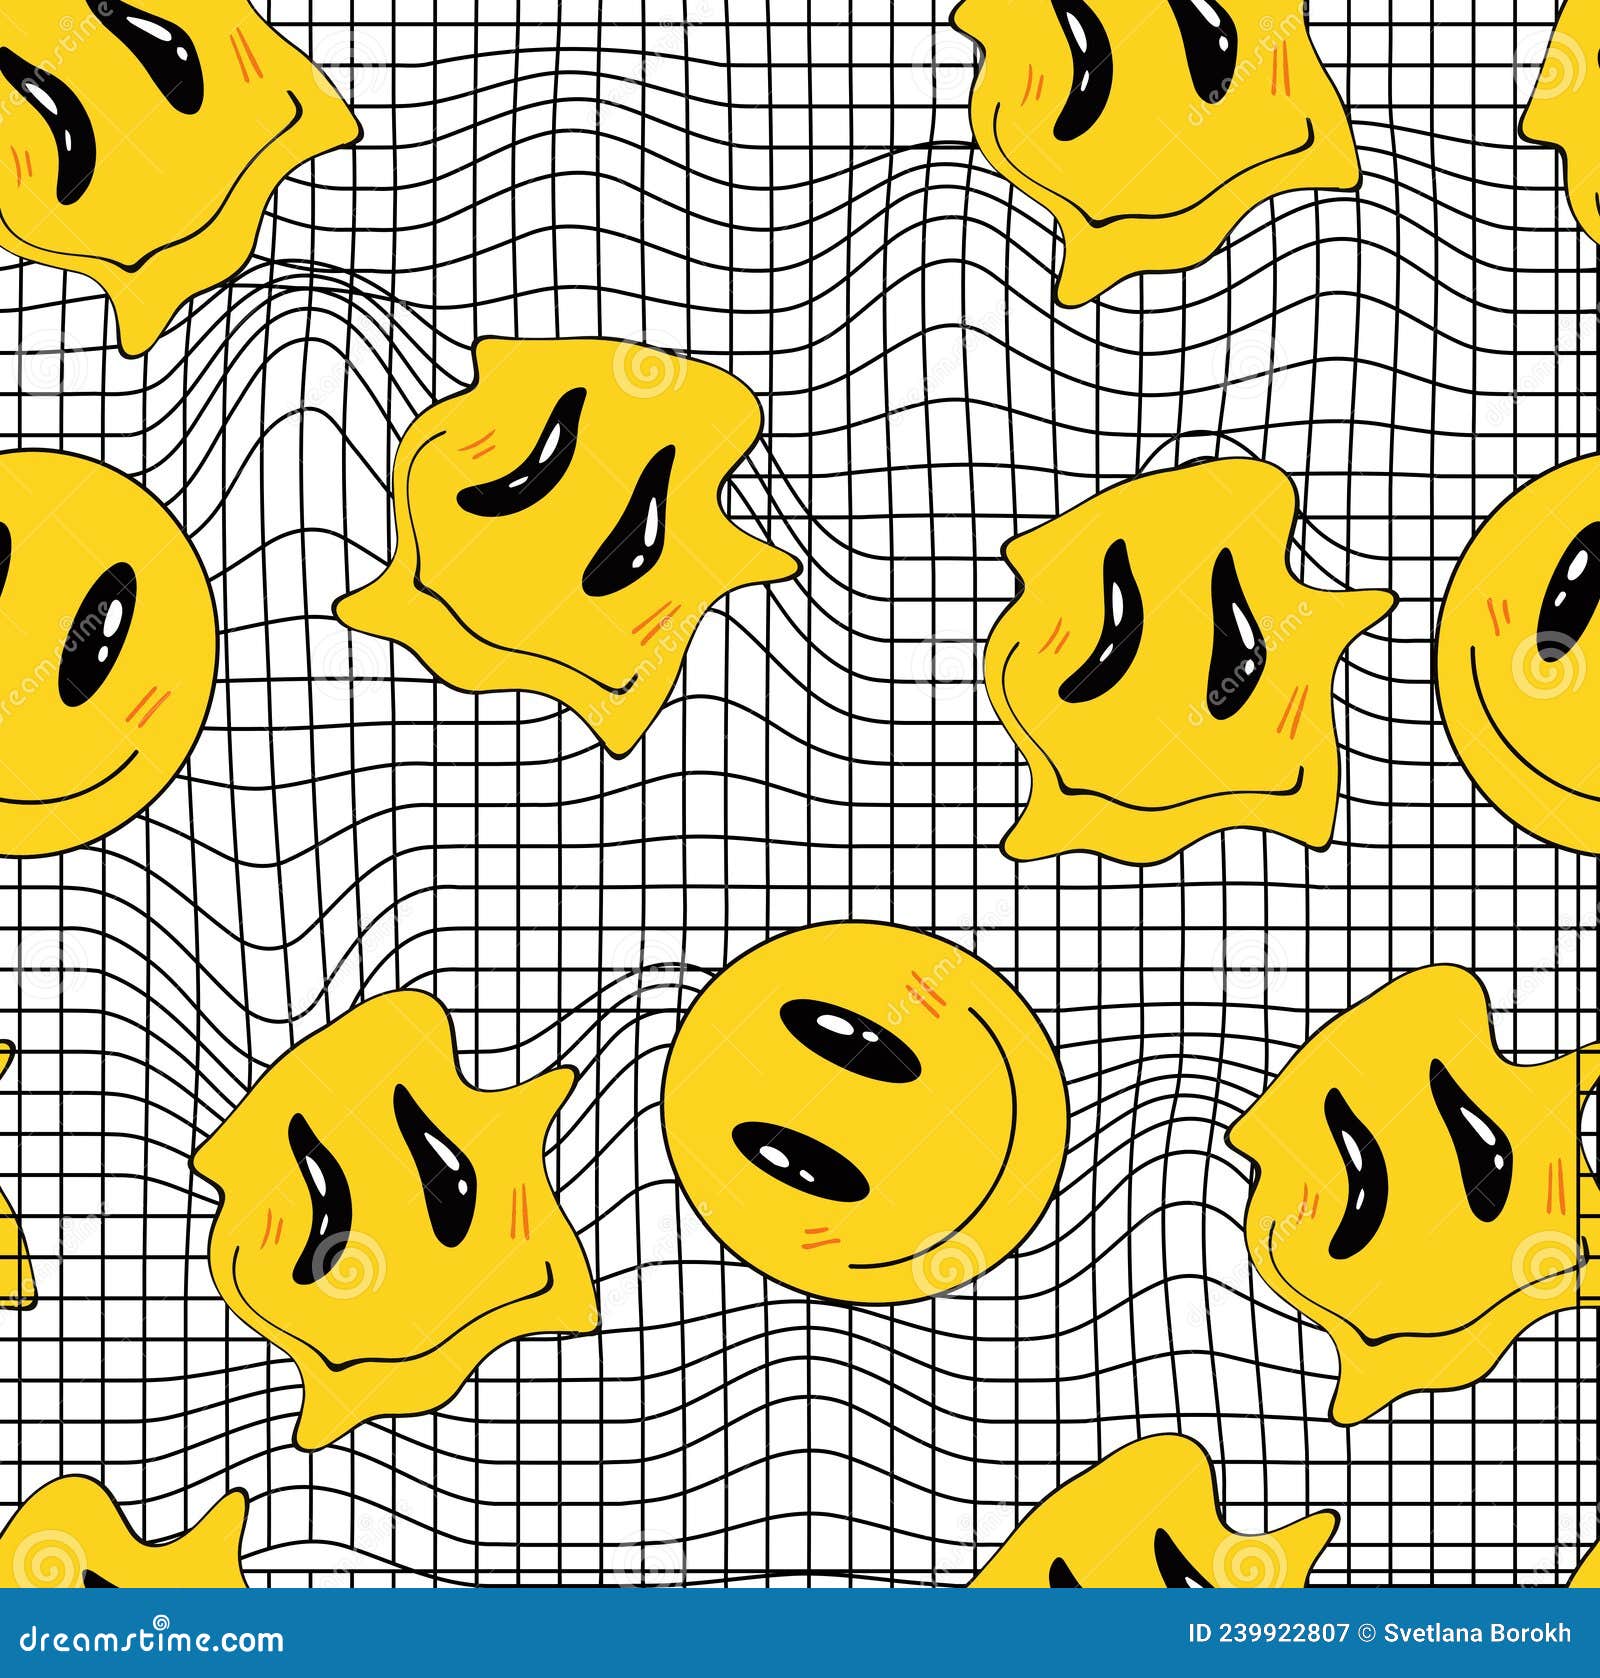 Drippy smiley face wallpaper  Wallpaper iphone neon Smile wallpaper  Trippy wallpaper